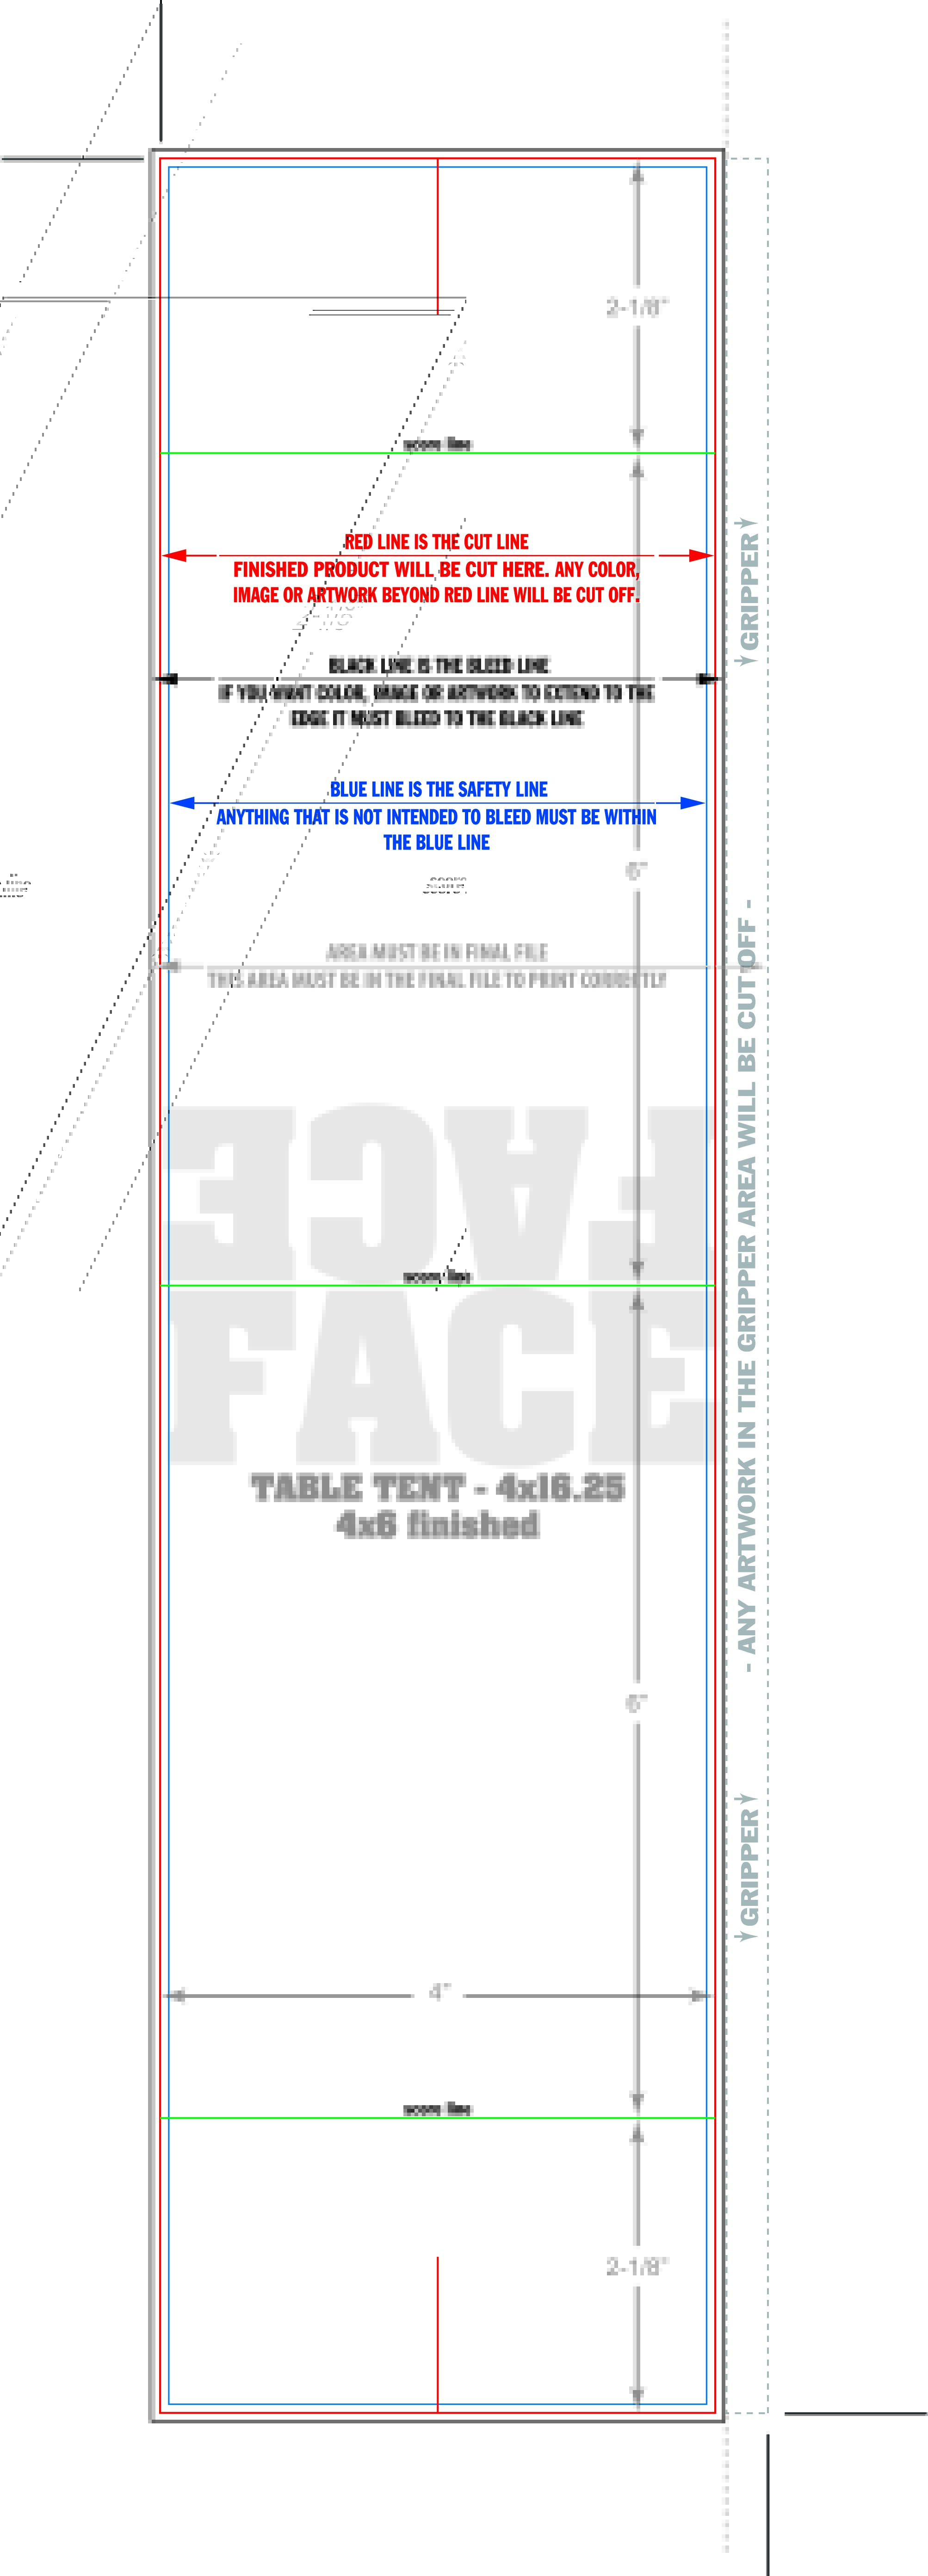 4x6 table tent template